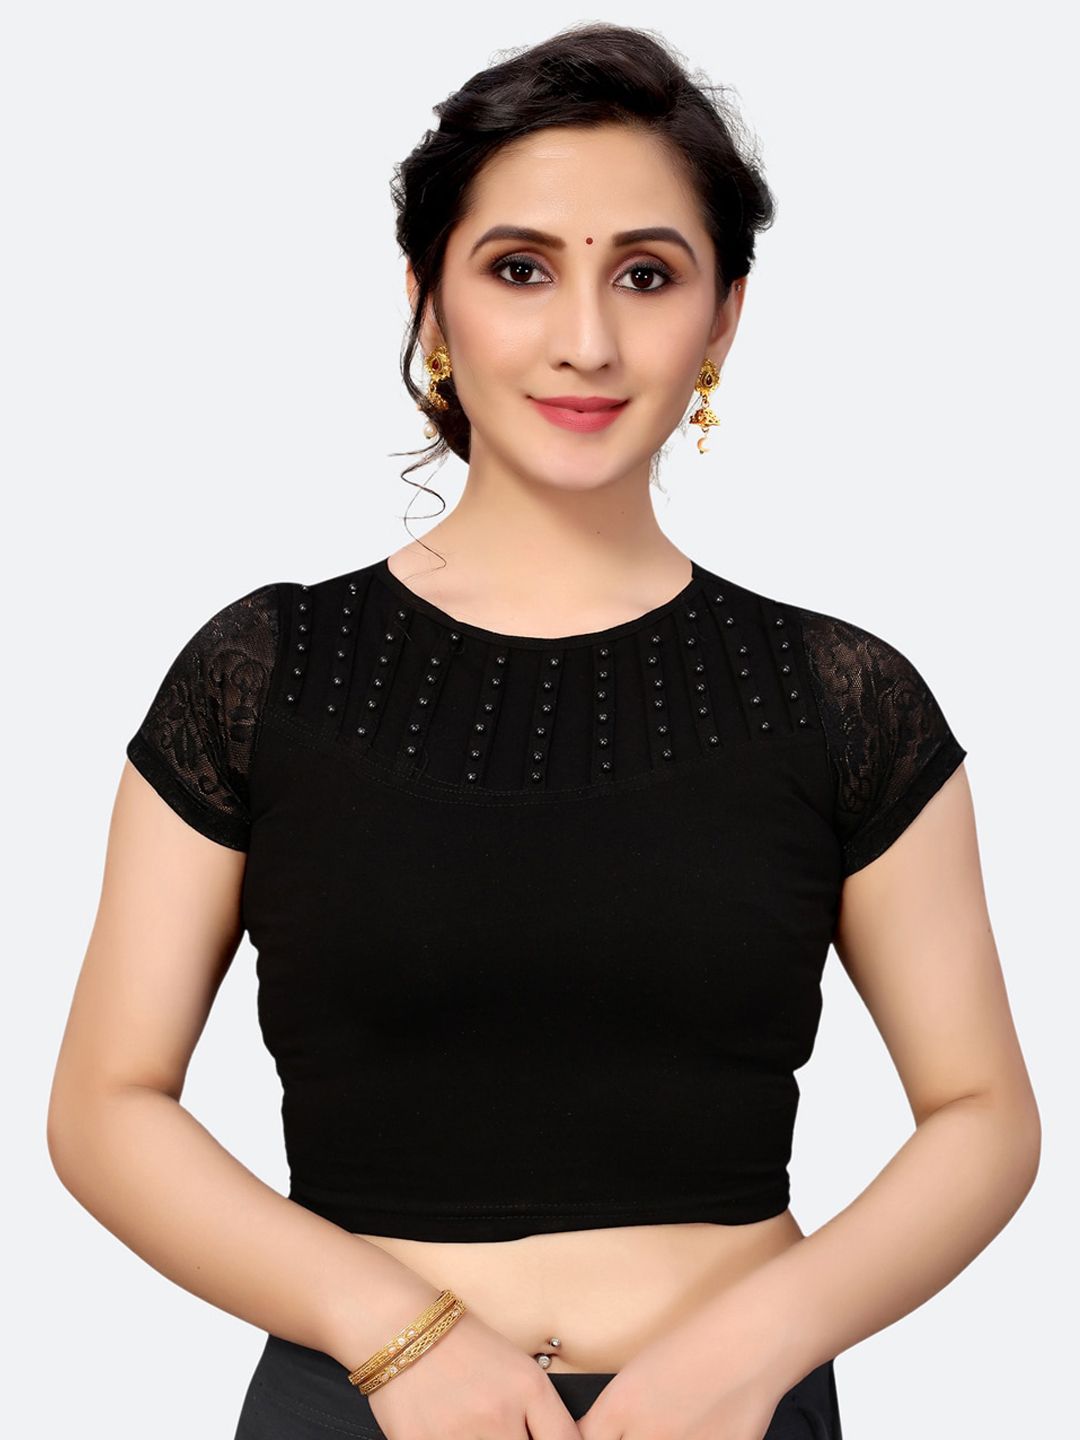 SIRIL Black Solid Woven-Design Saree Blouse Price in India